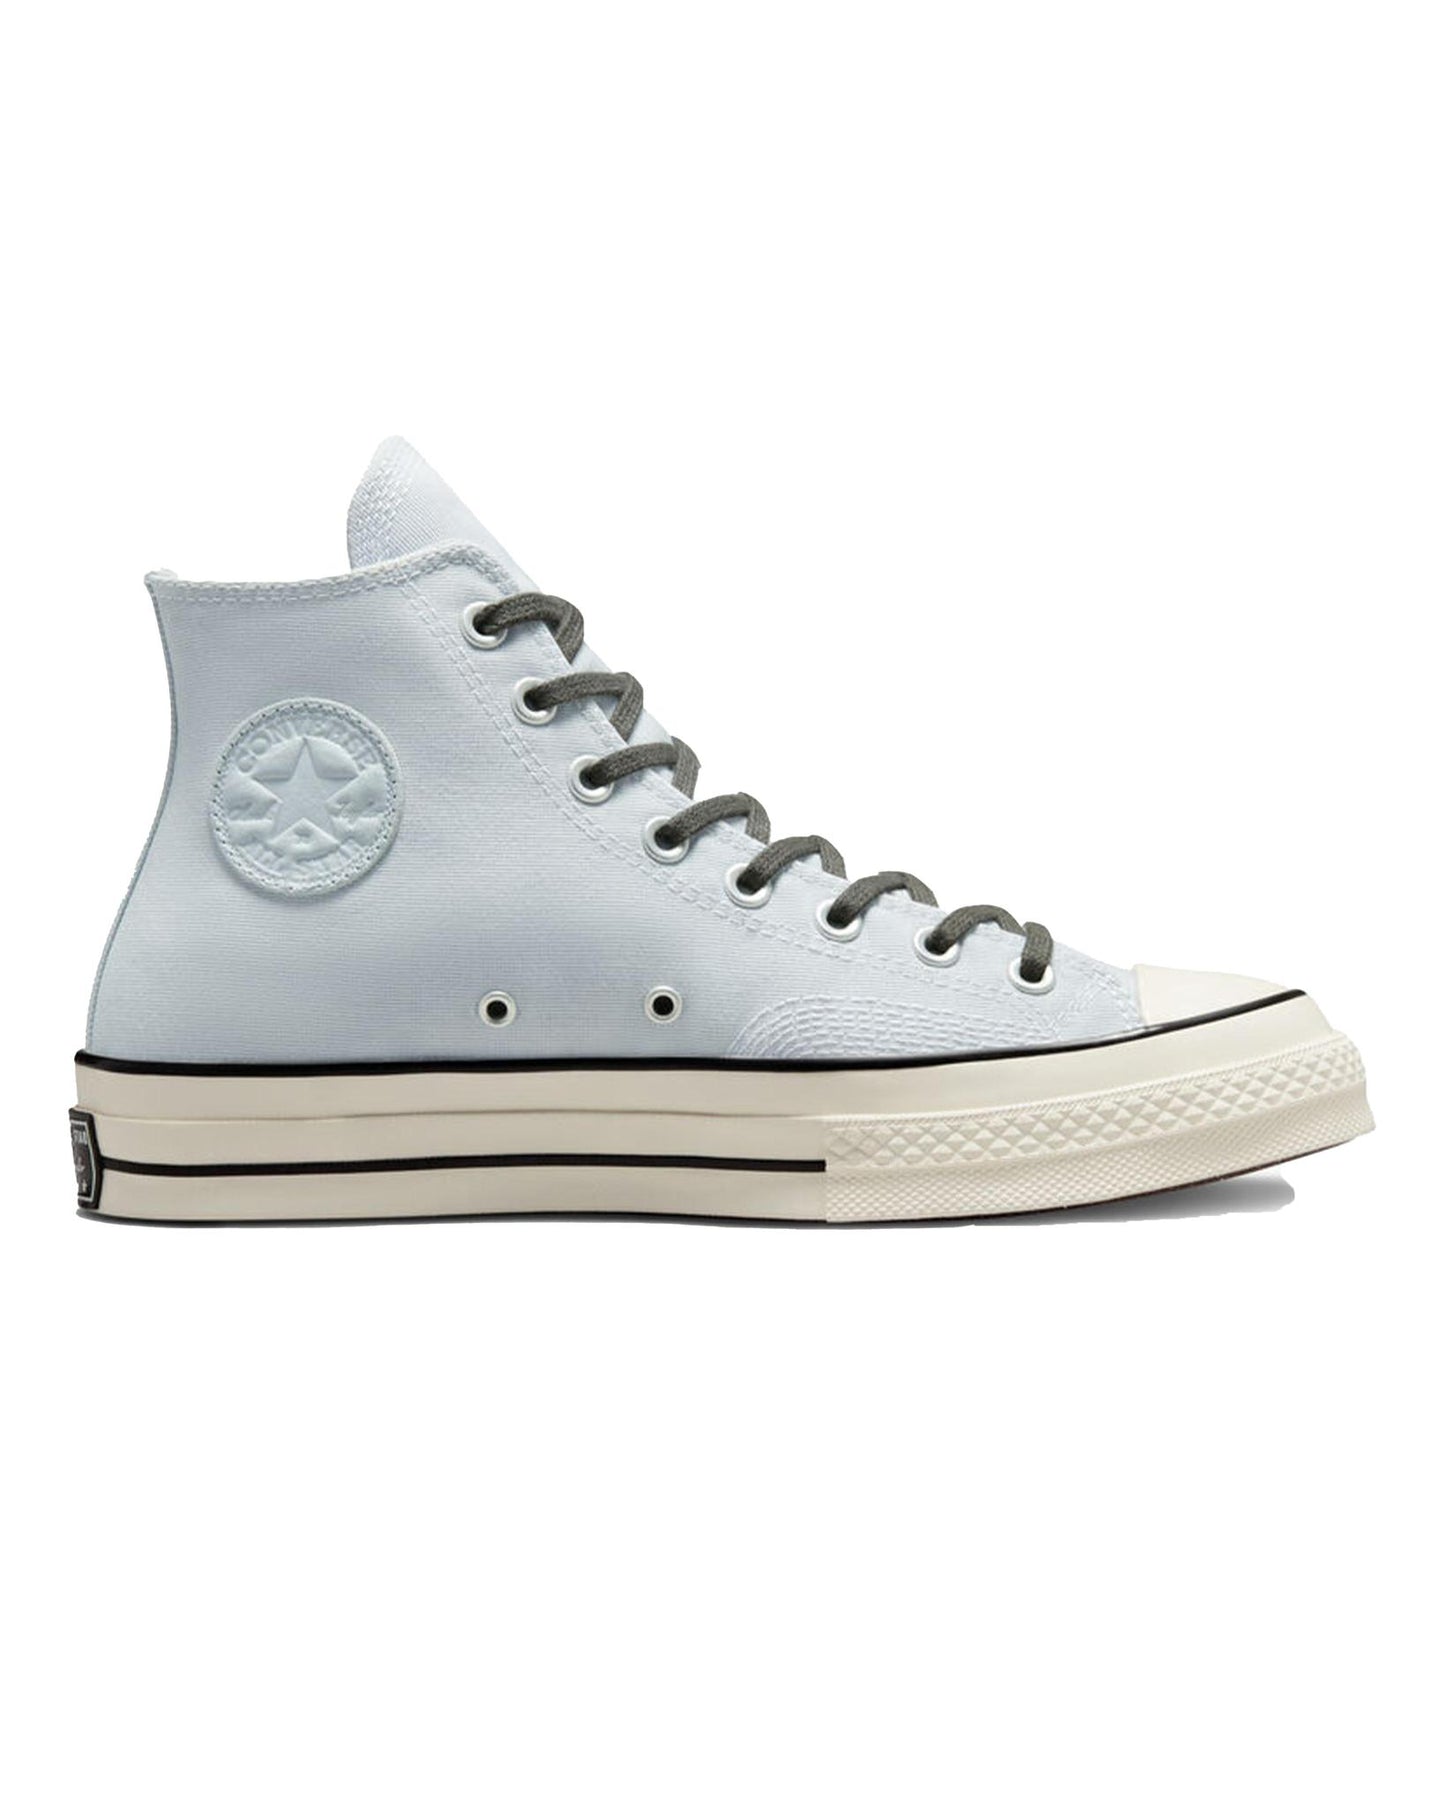 Converse Chuck 70 Hi Ghosted/Cyber Grey/White |